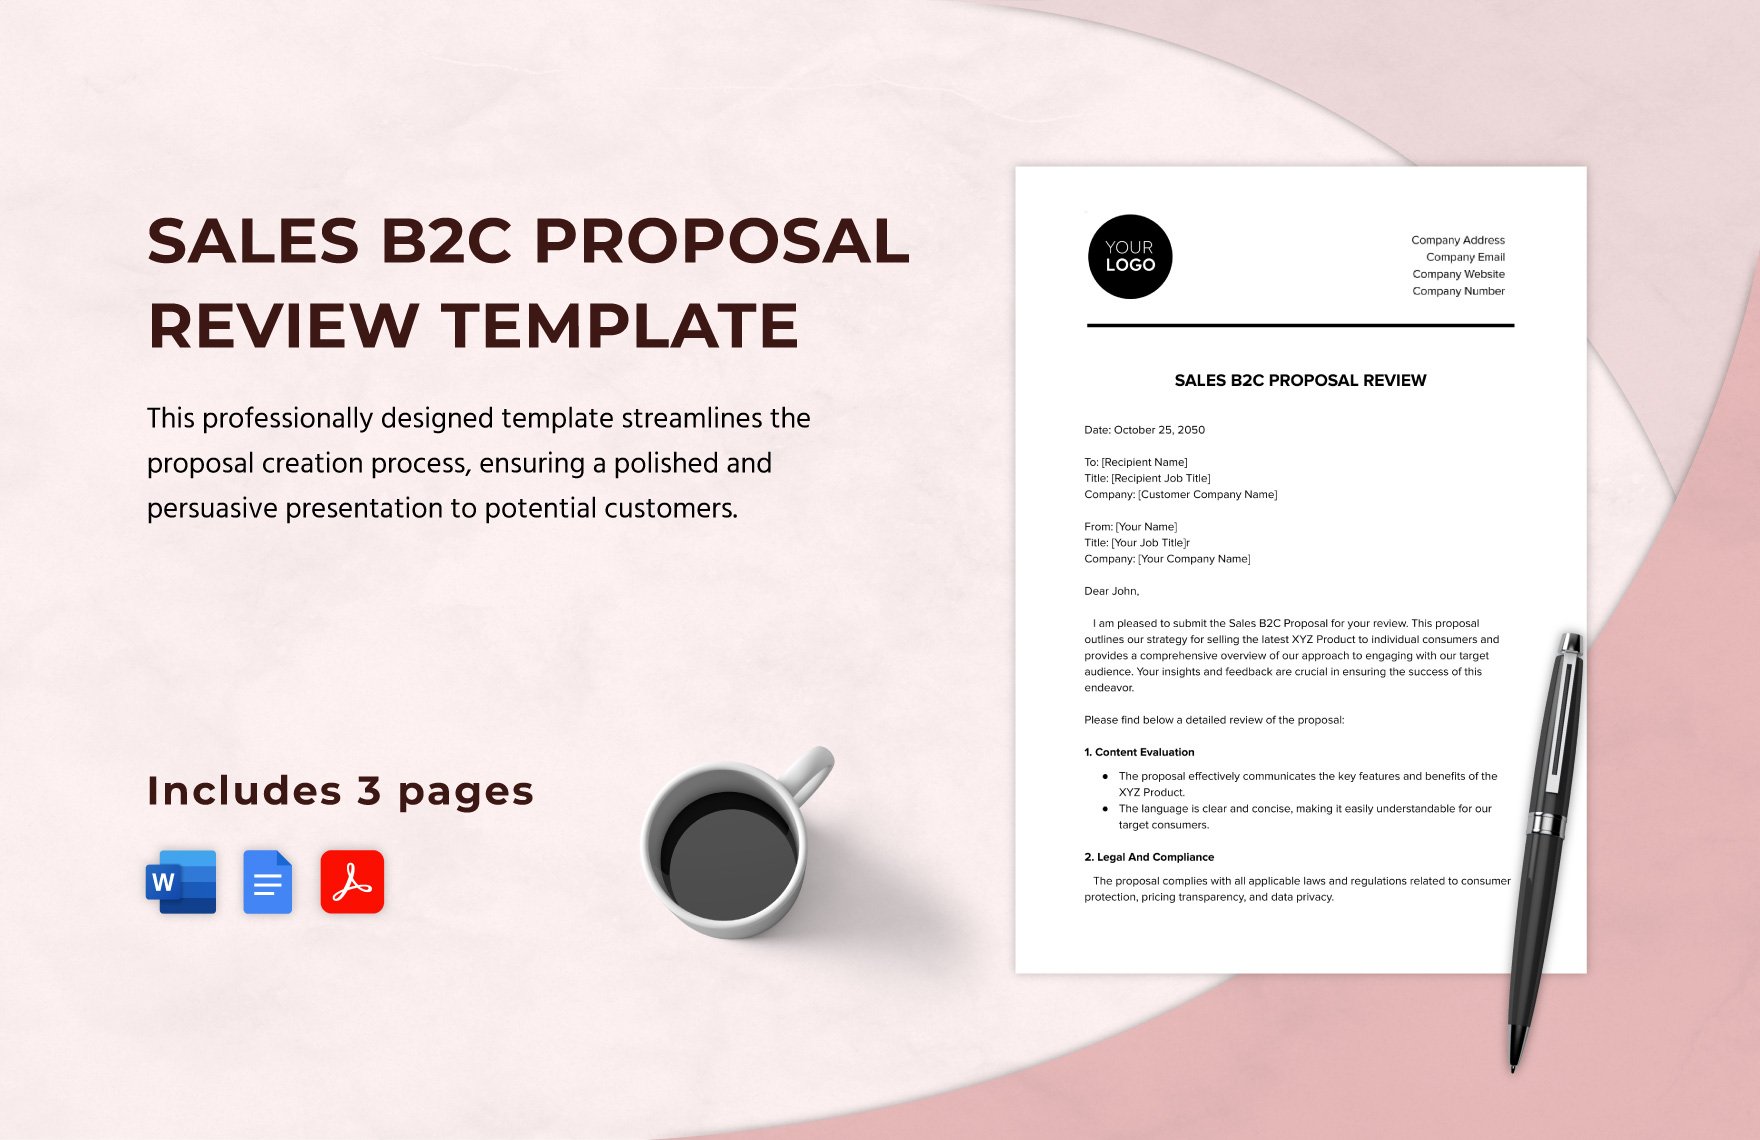 Sales B2C Proposal Review Template in Word, Google Docs, PDF